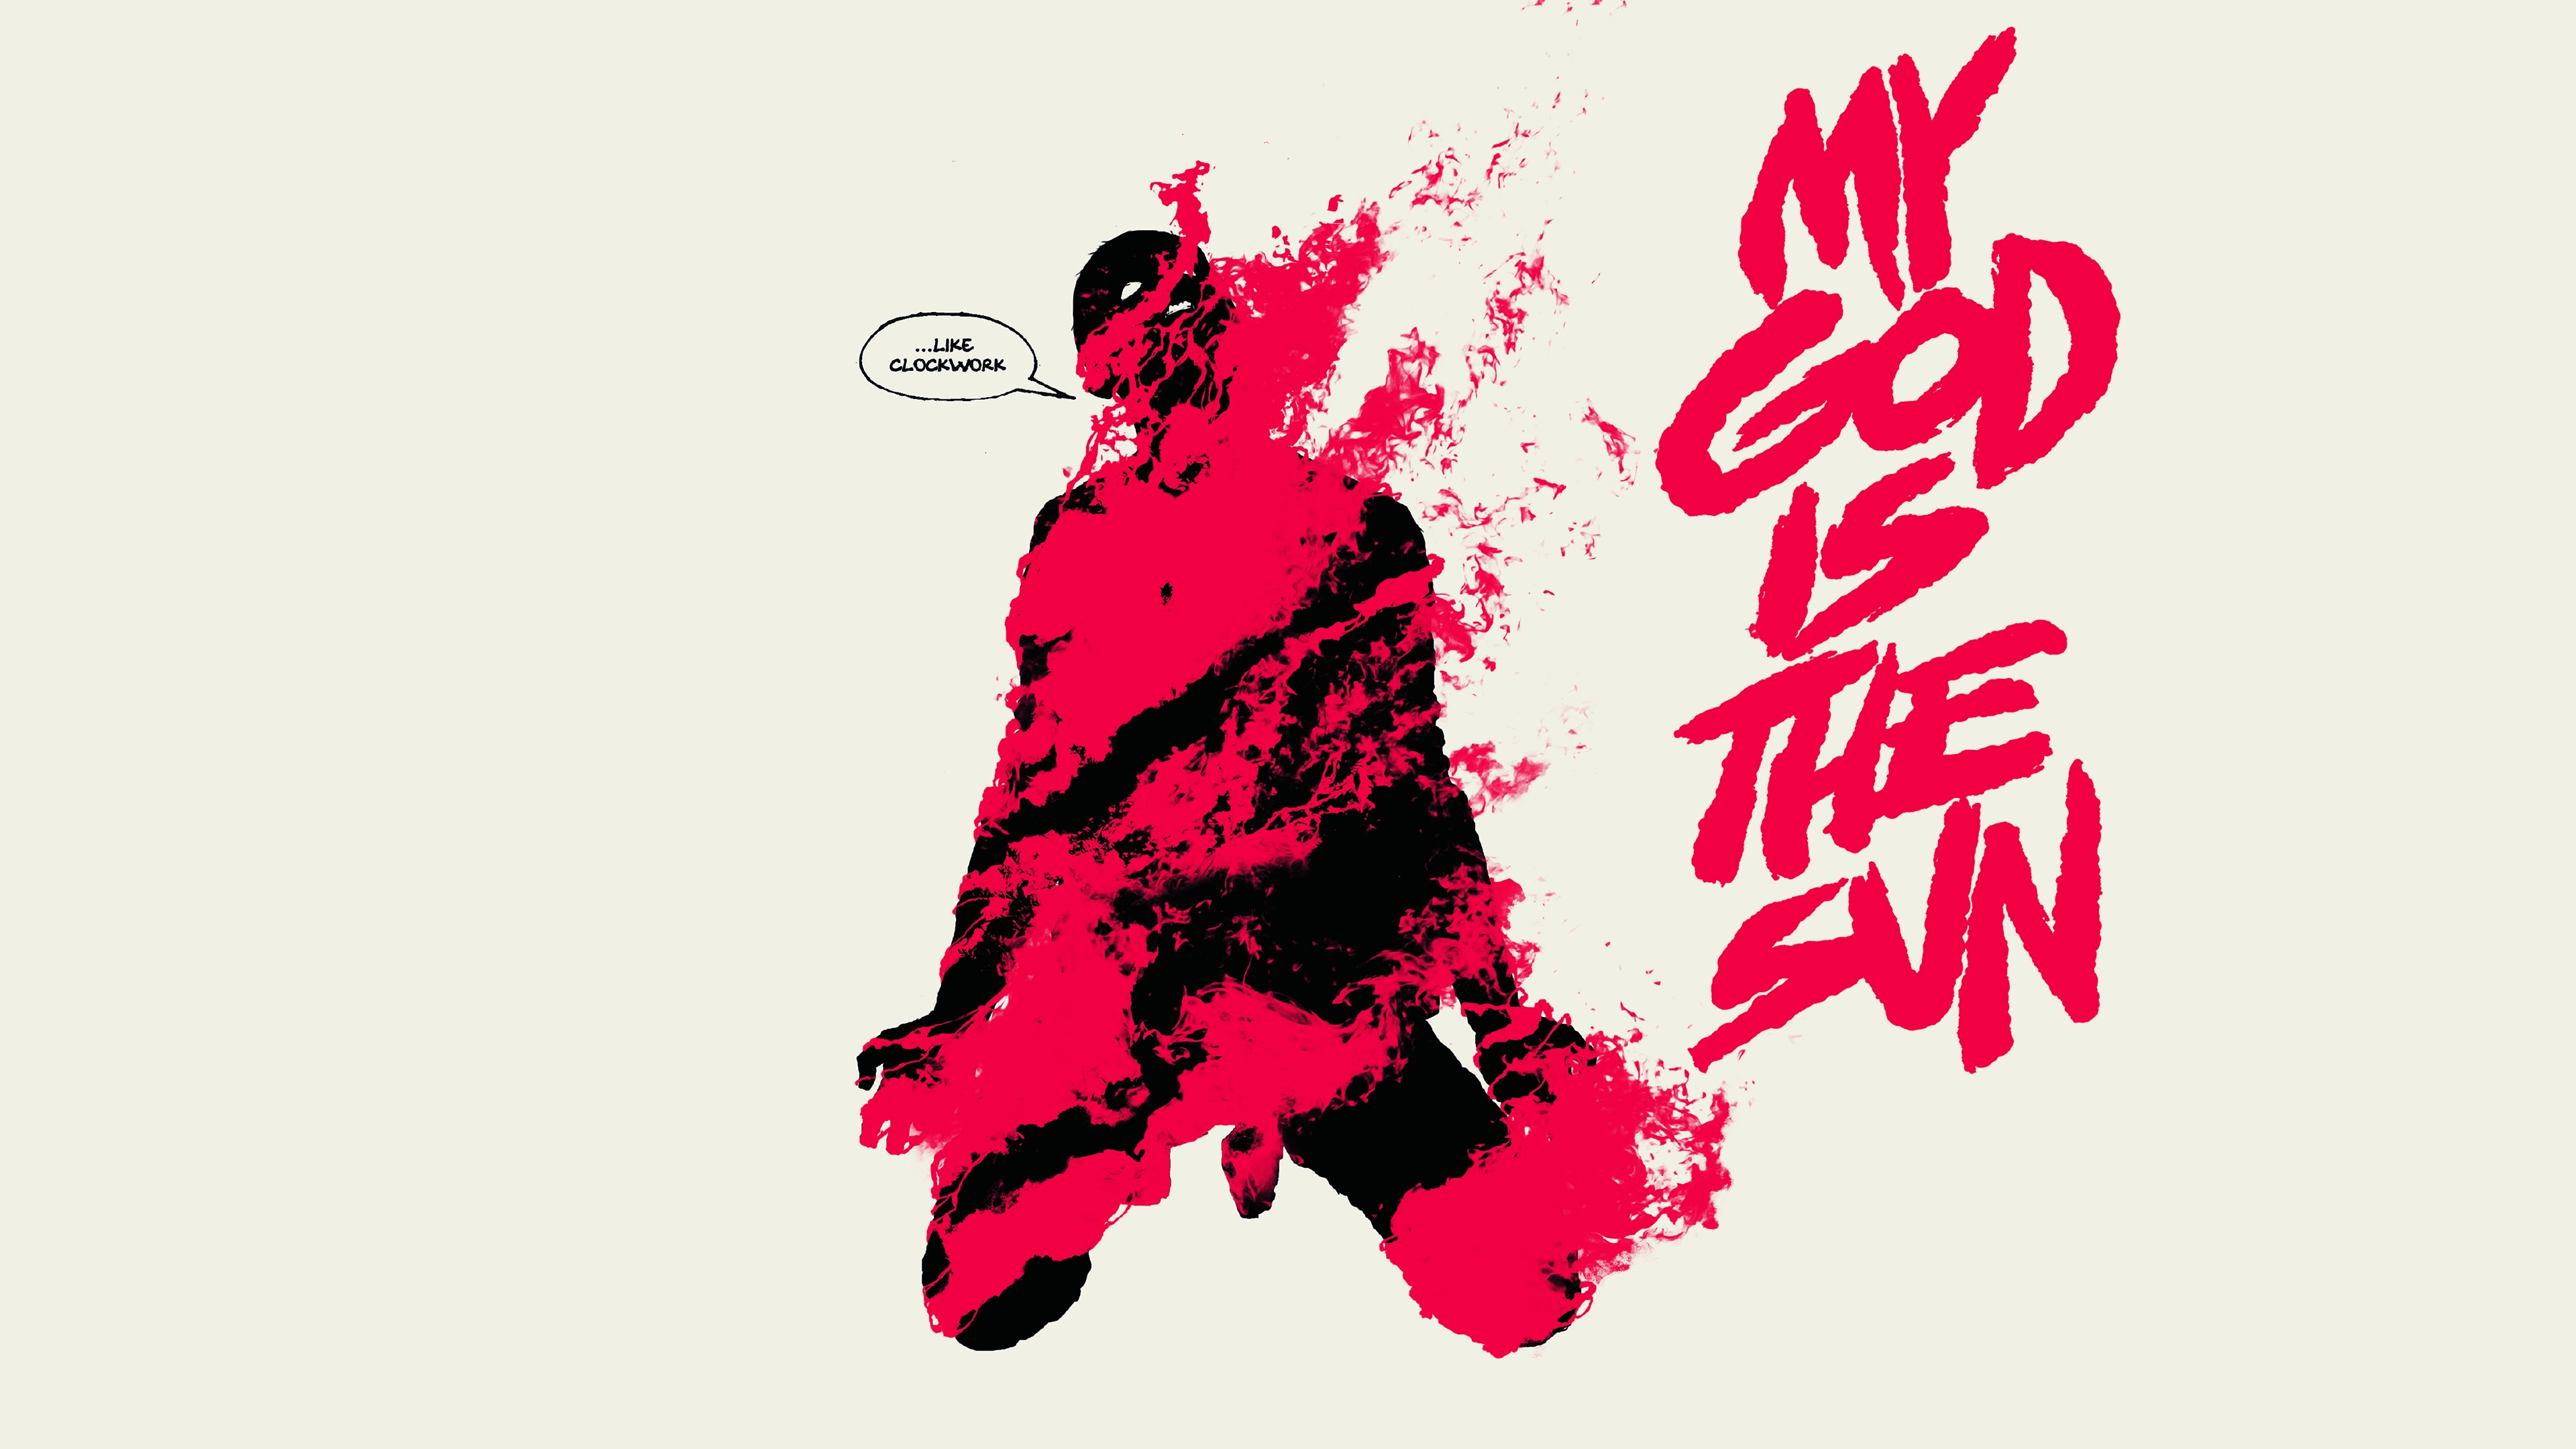 queens of the stone age wallpaper,graphic design,red,pink,font,magenta